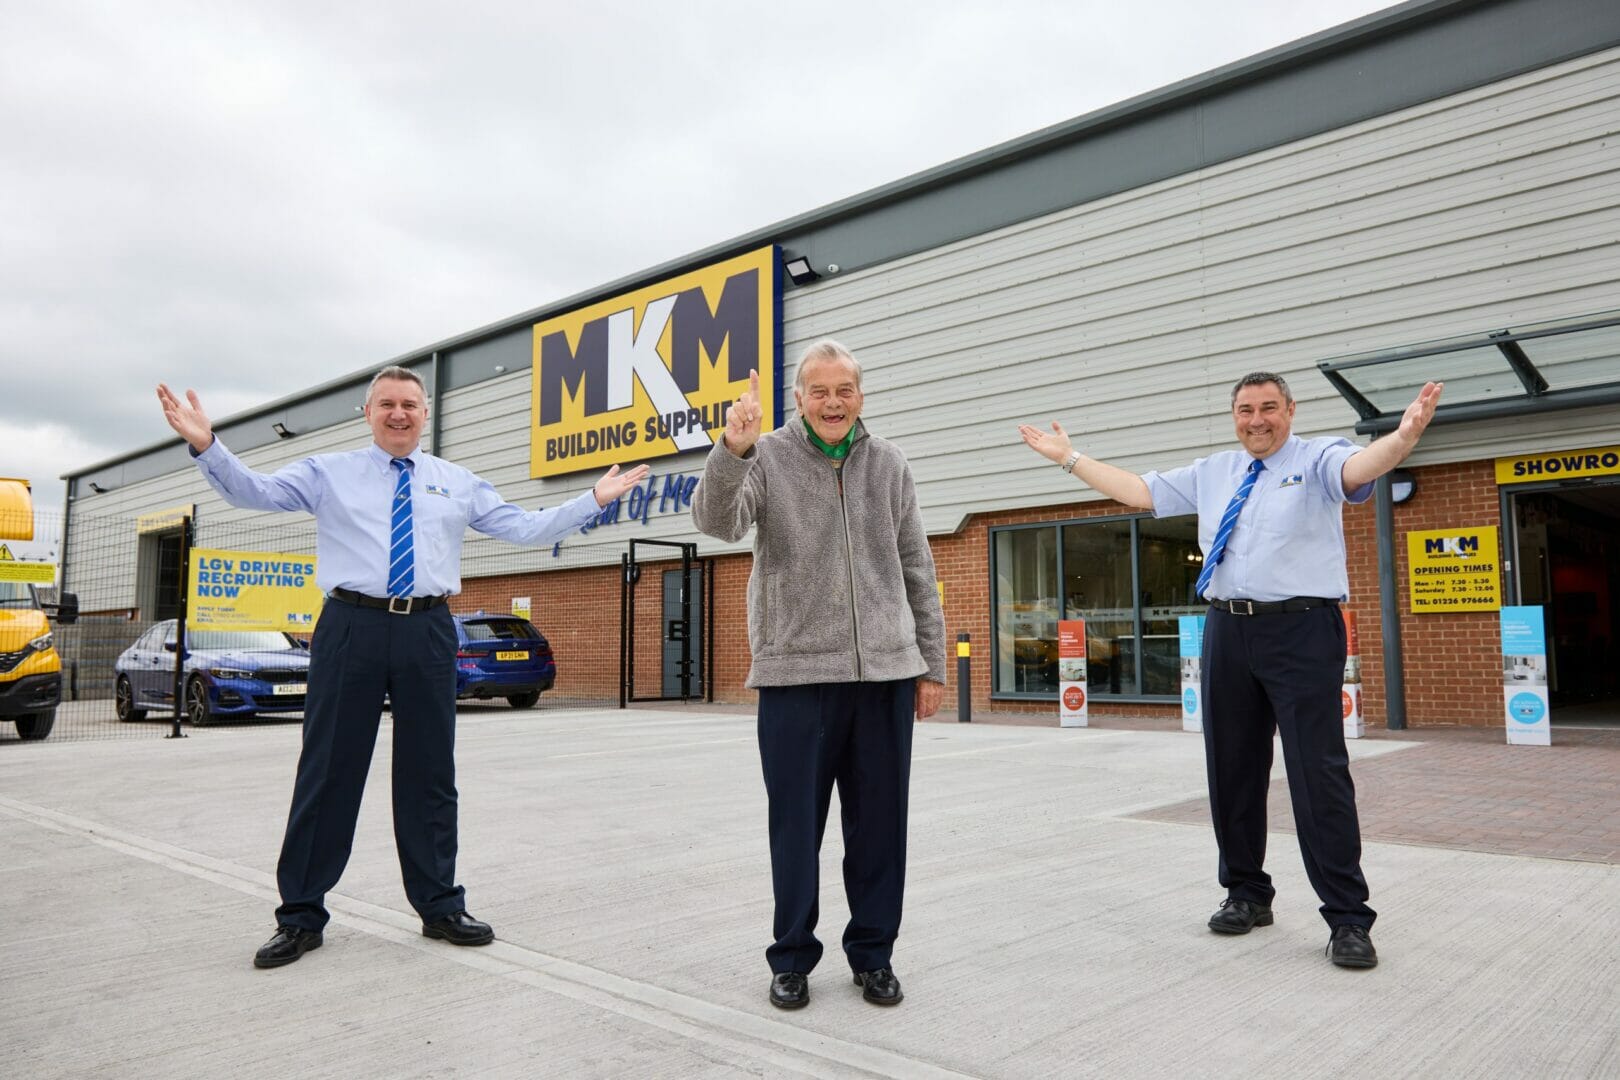 HOWZAT! WORLD FAMOUS YORKSHIRE CRICKET LEGEND DICKIE BIRD TO OFFICIALLY OPEN NEW MKM BARNSLEY @mkmbs